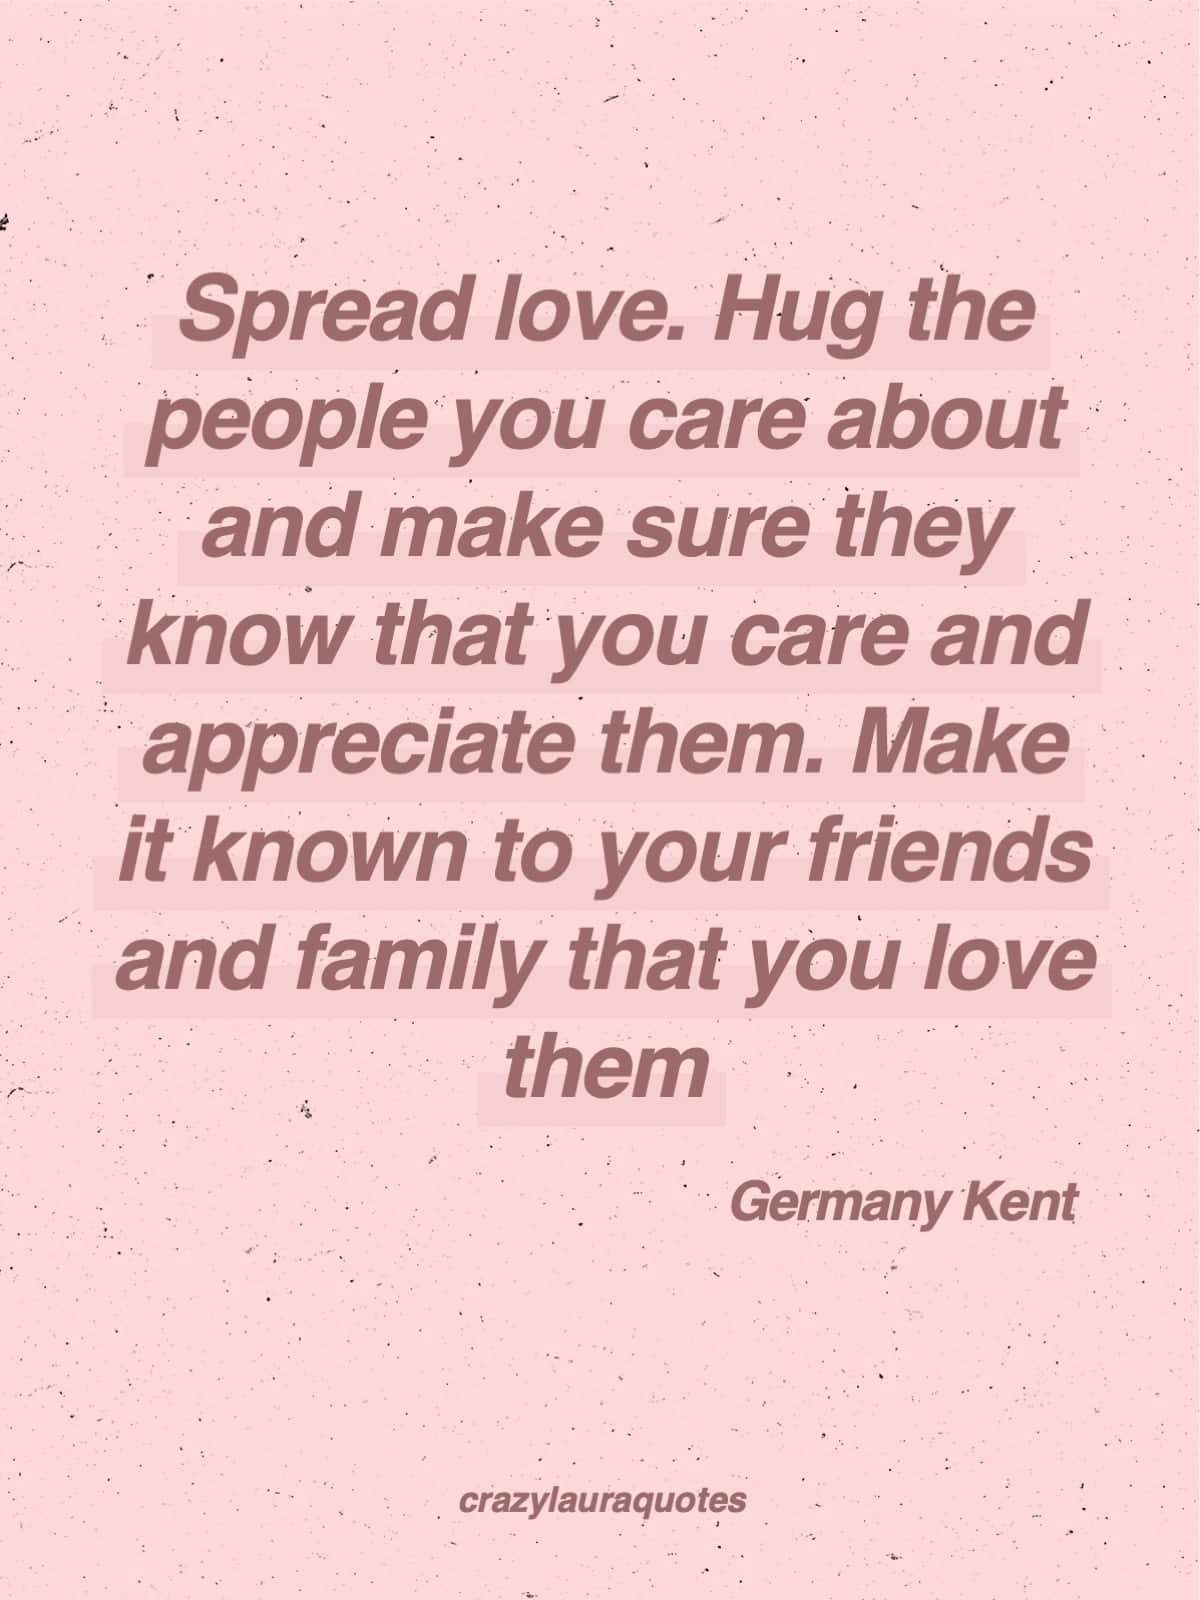 love your family and friends